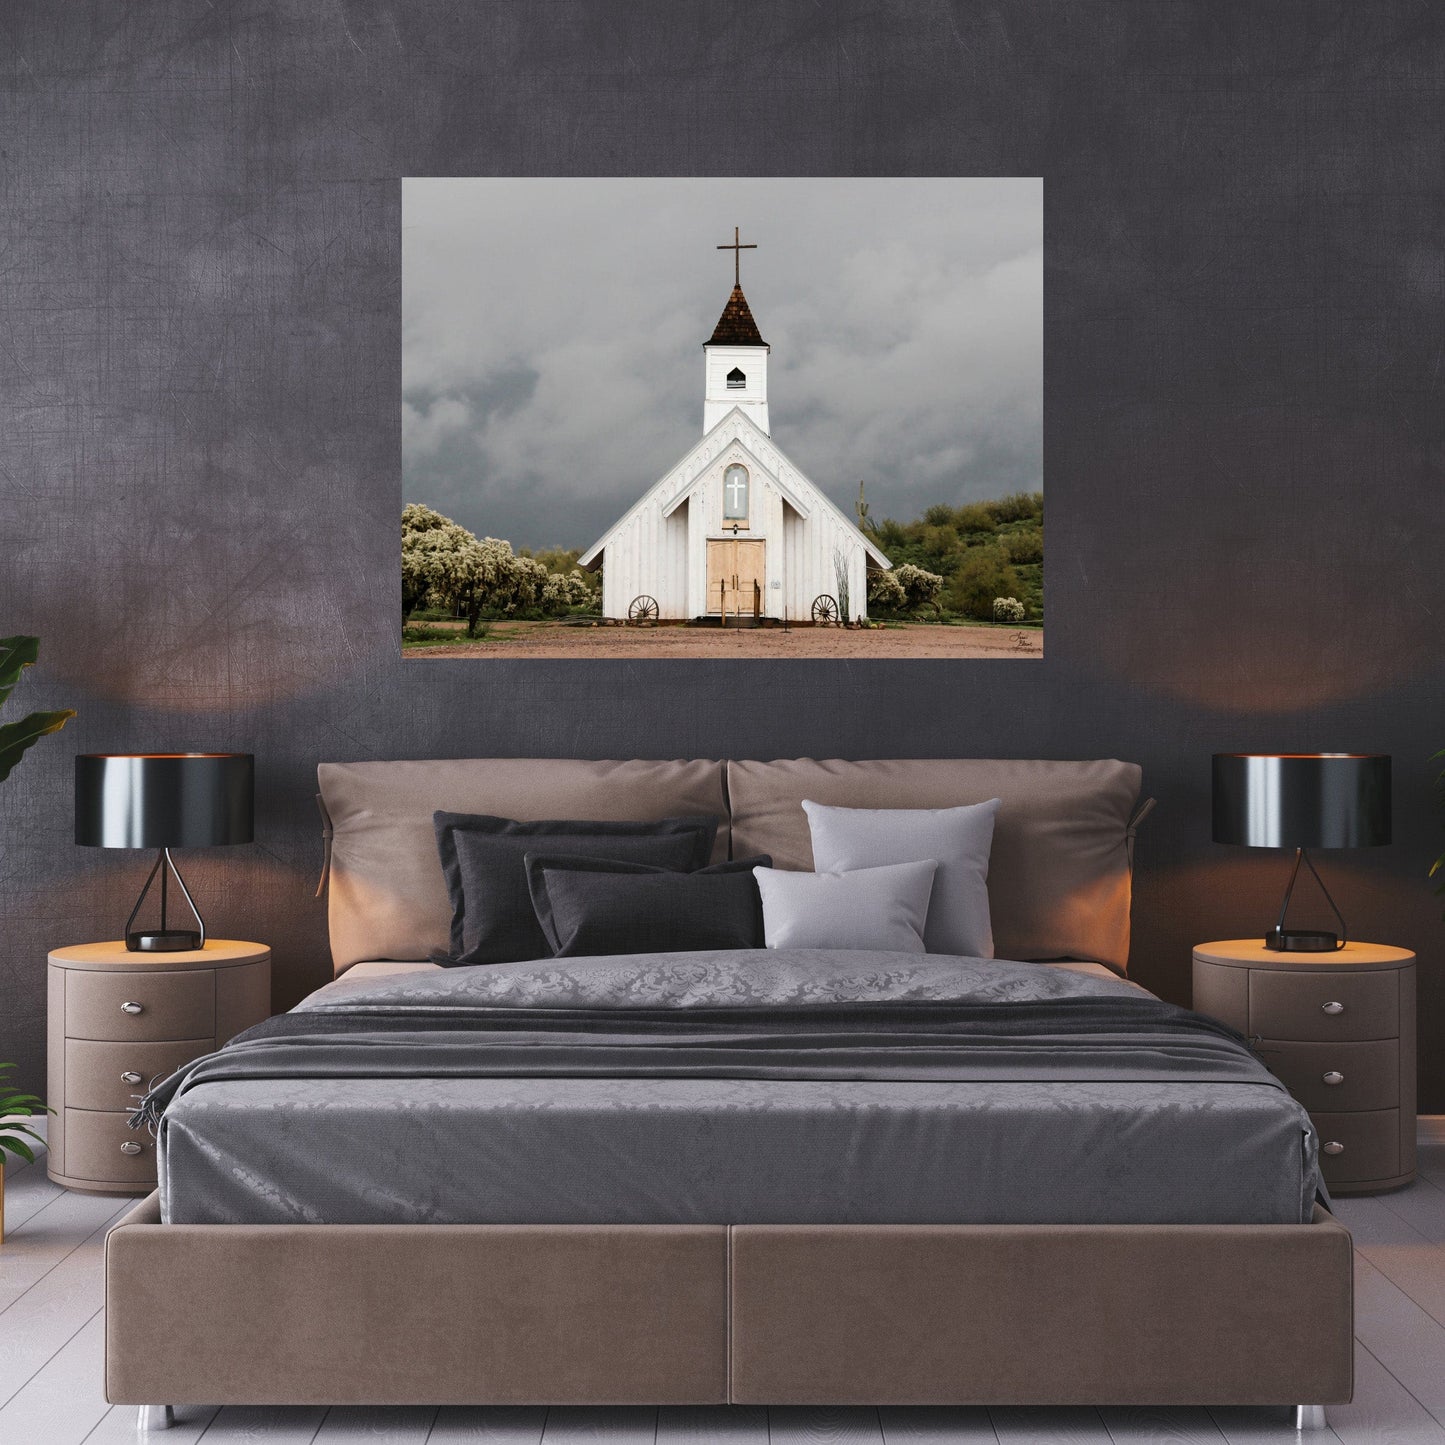 white church wall art on dark colored bedroom wall